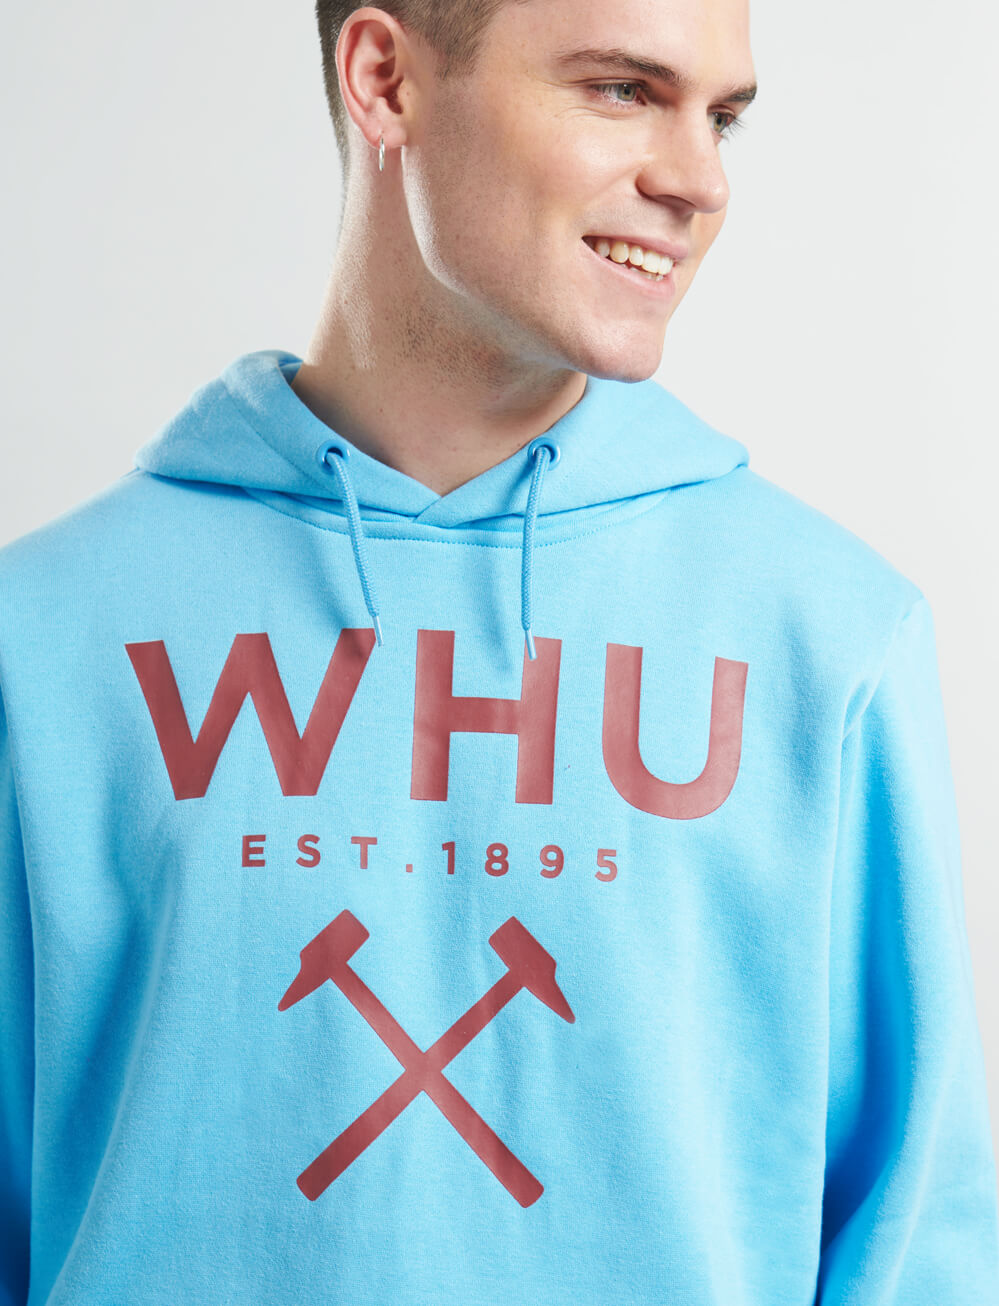 Official West Ham United Logo Hoodie - Blue - The World Football Store